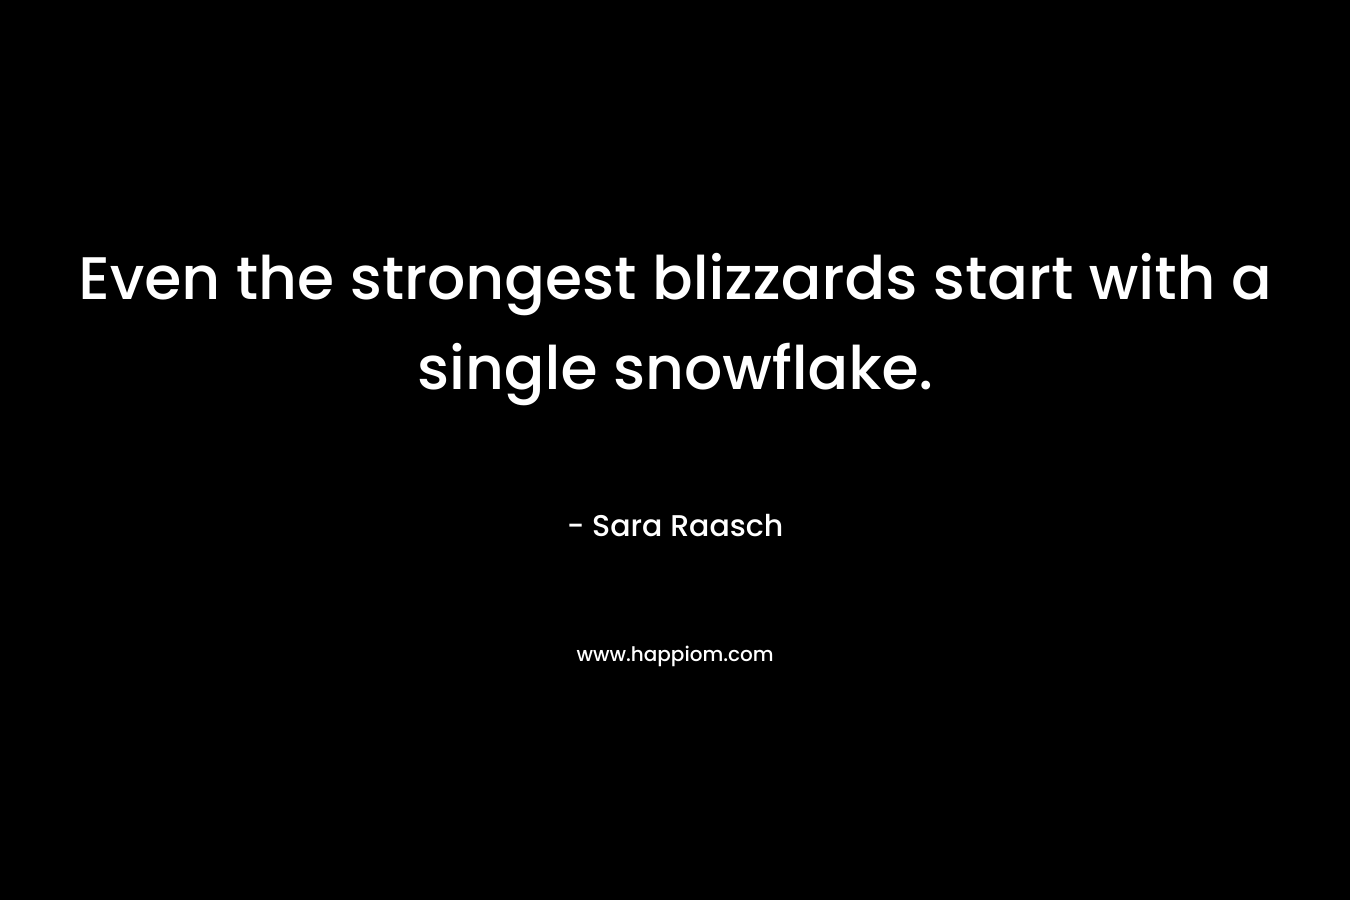 Even the strongest blizzards start with a single snowflake. – Sara Raasch